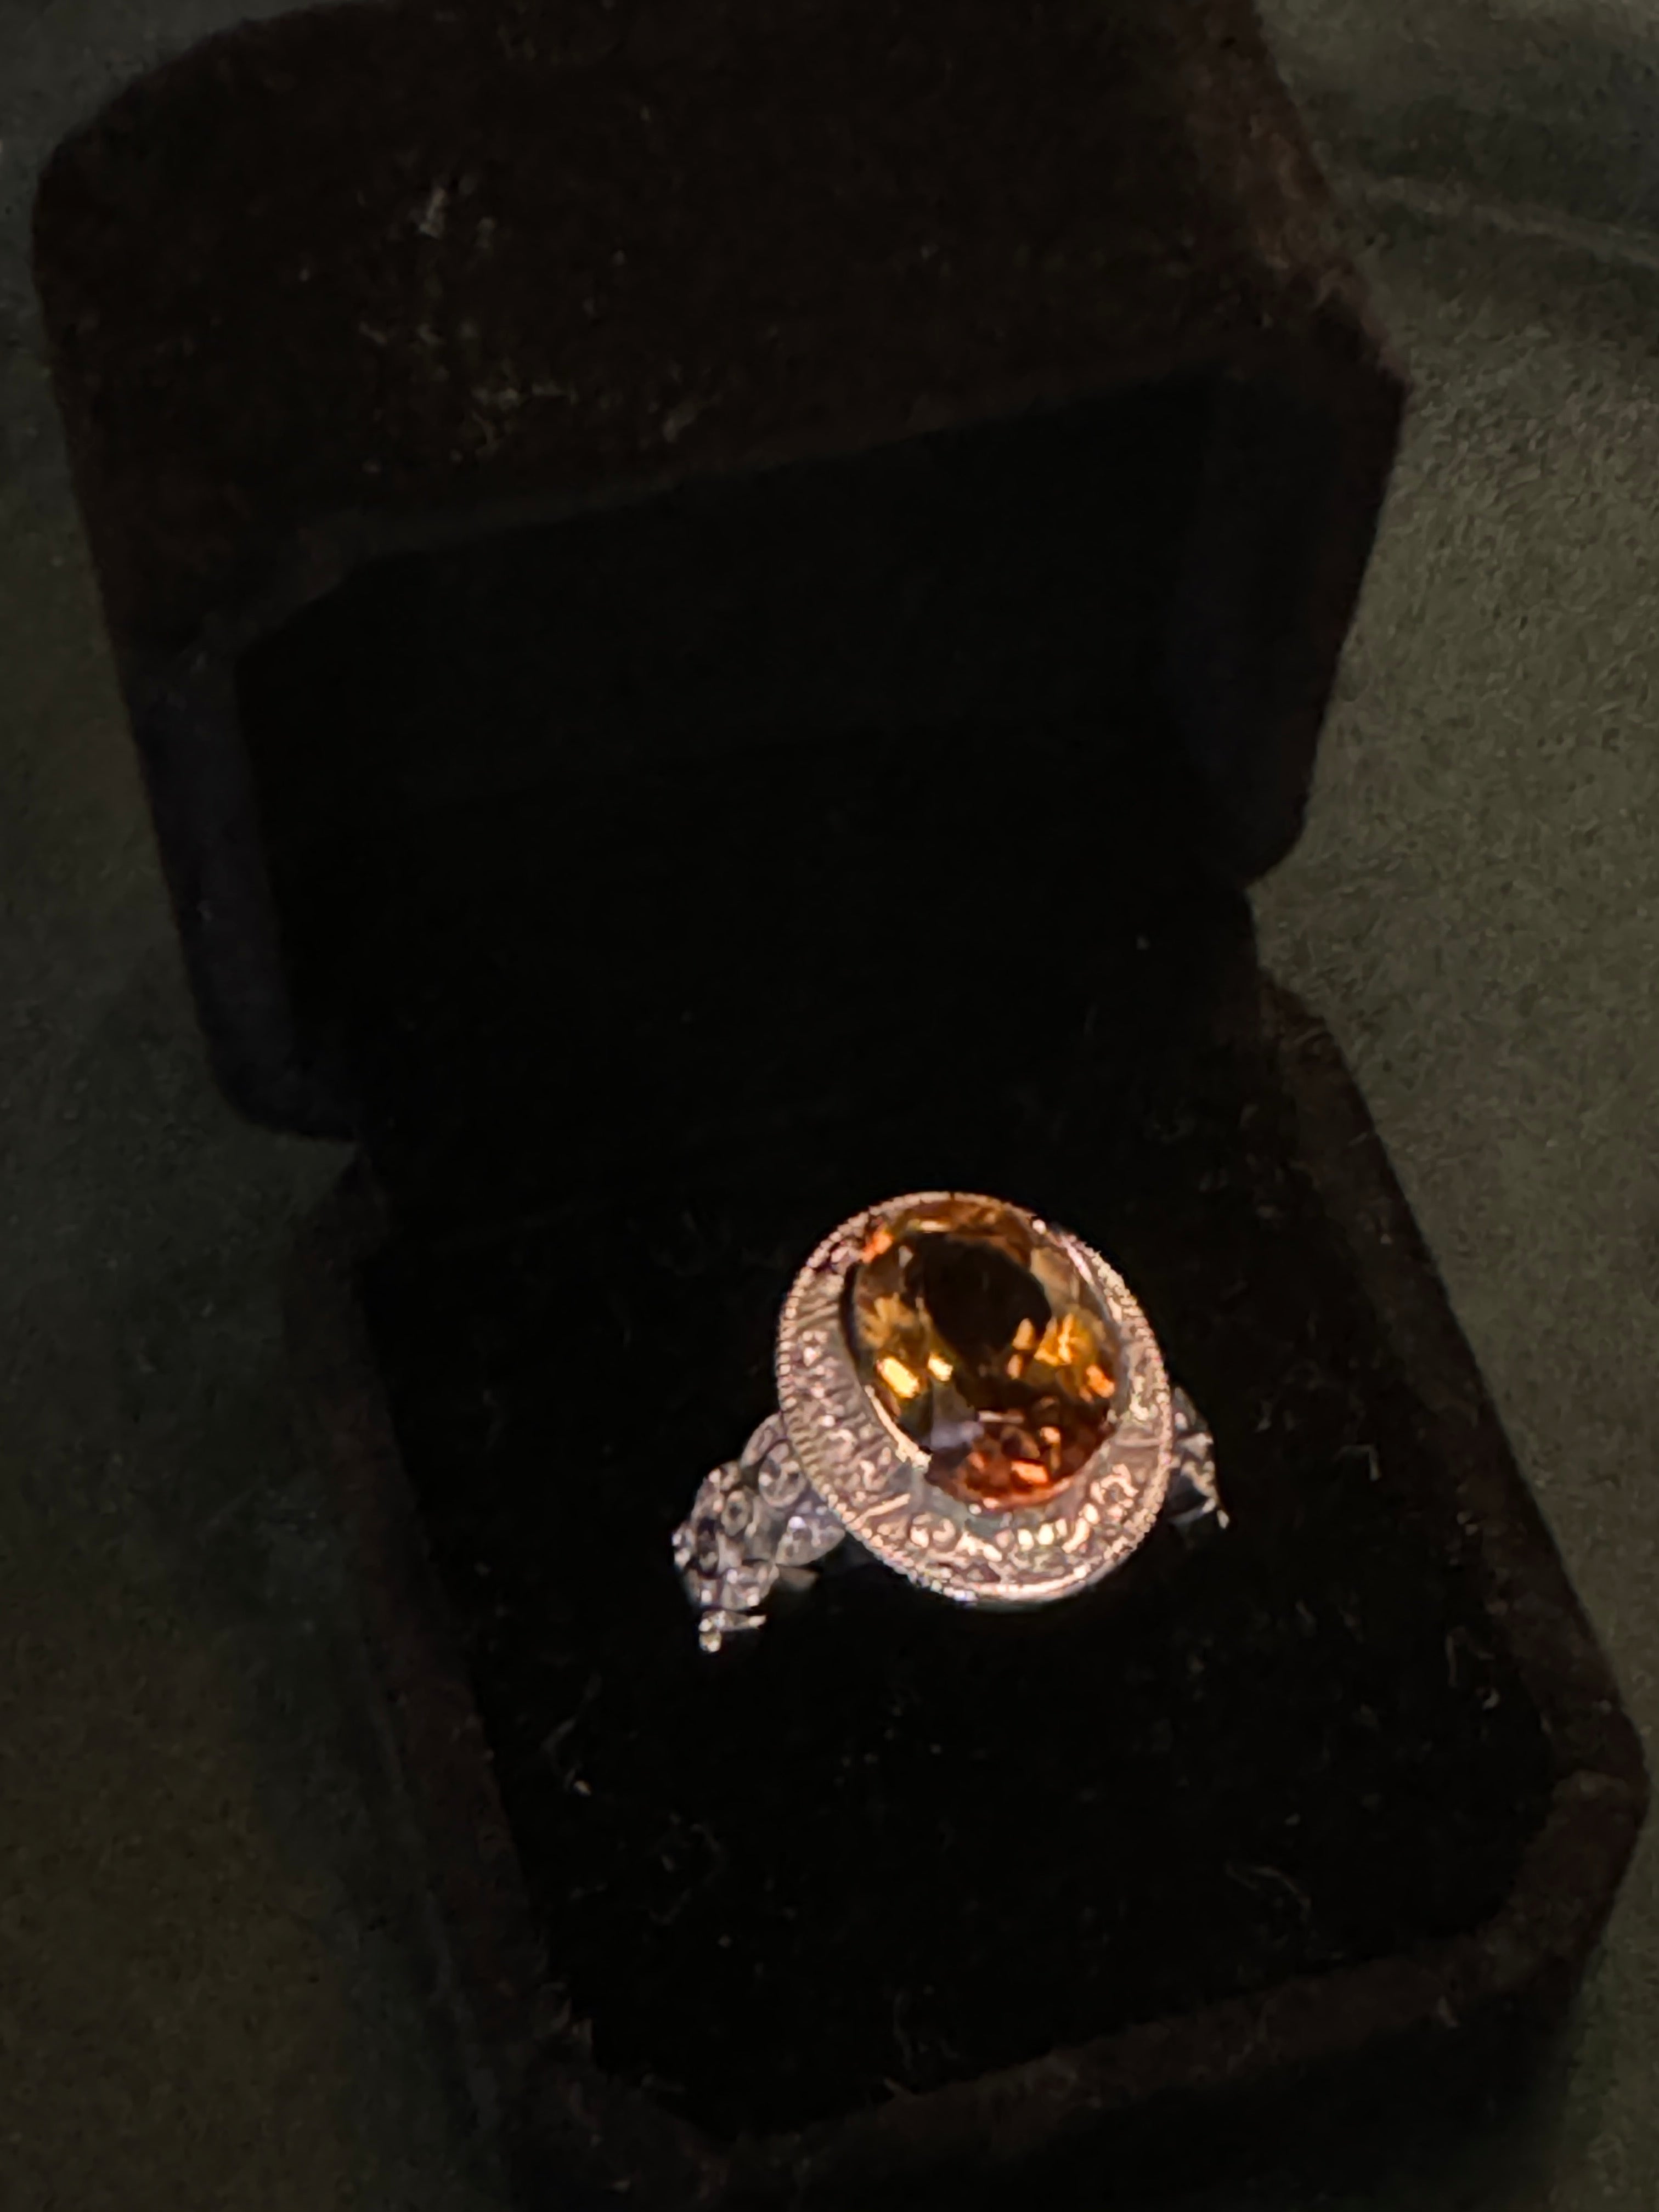 Oval Cut Citrine Sterling Silver Ring